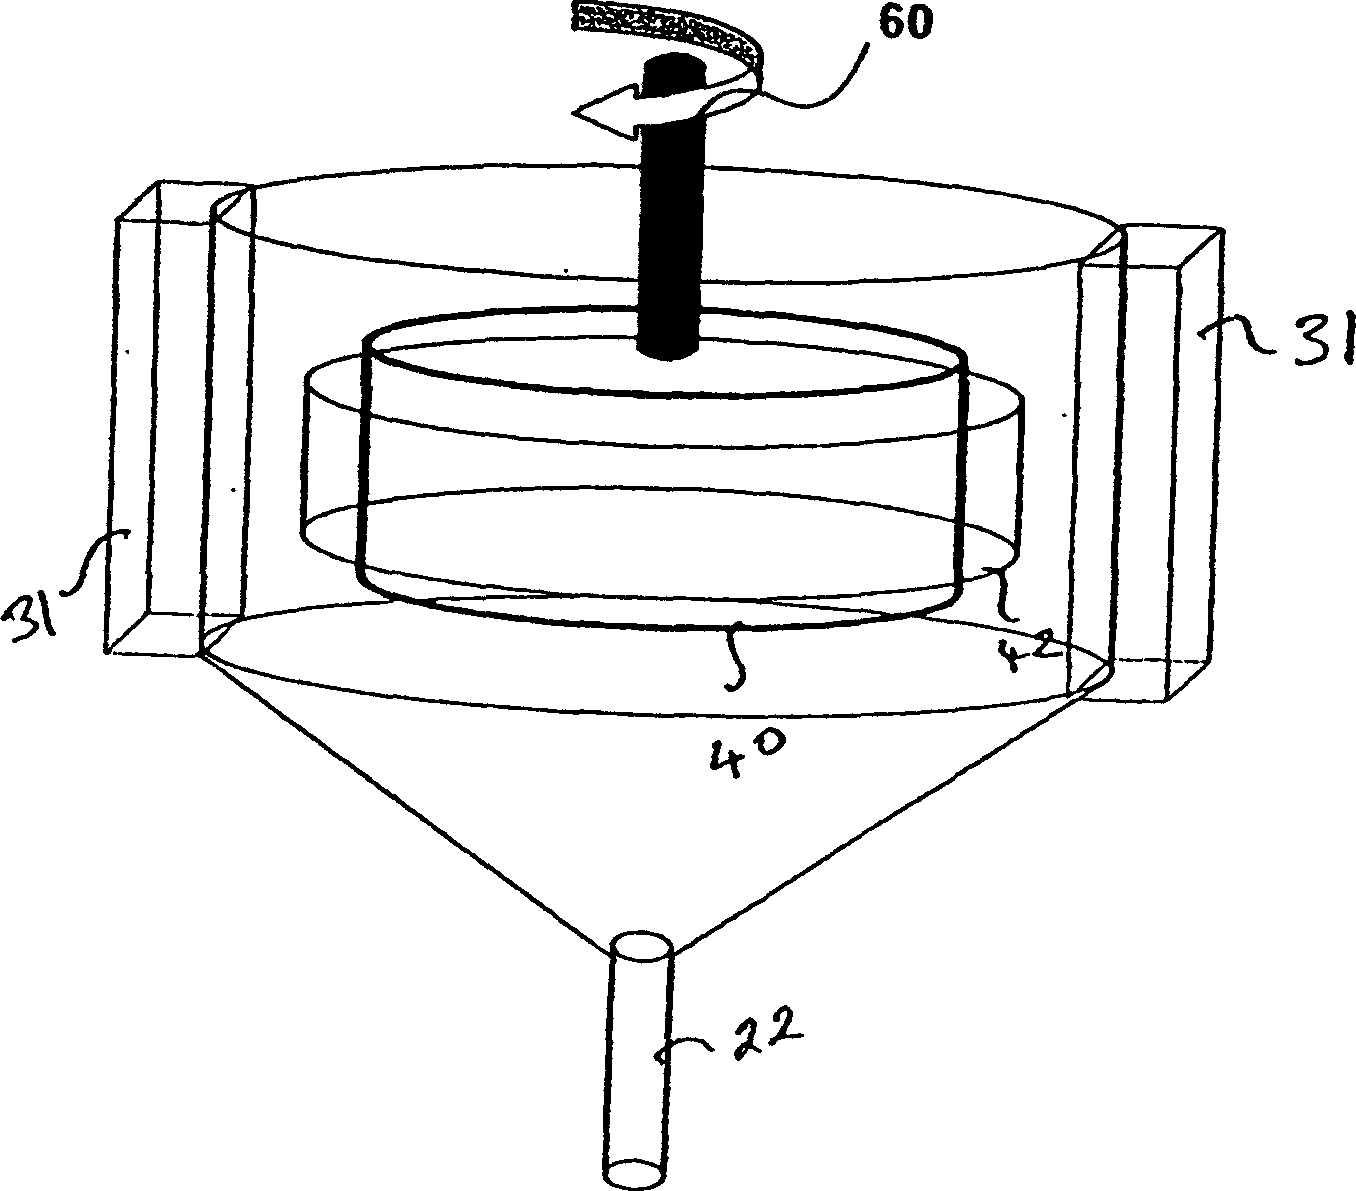 Electrolytic cell for removal of material from a solution